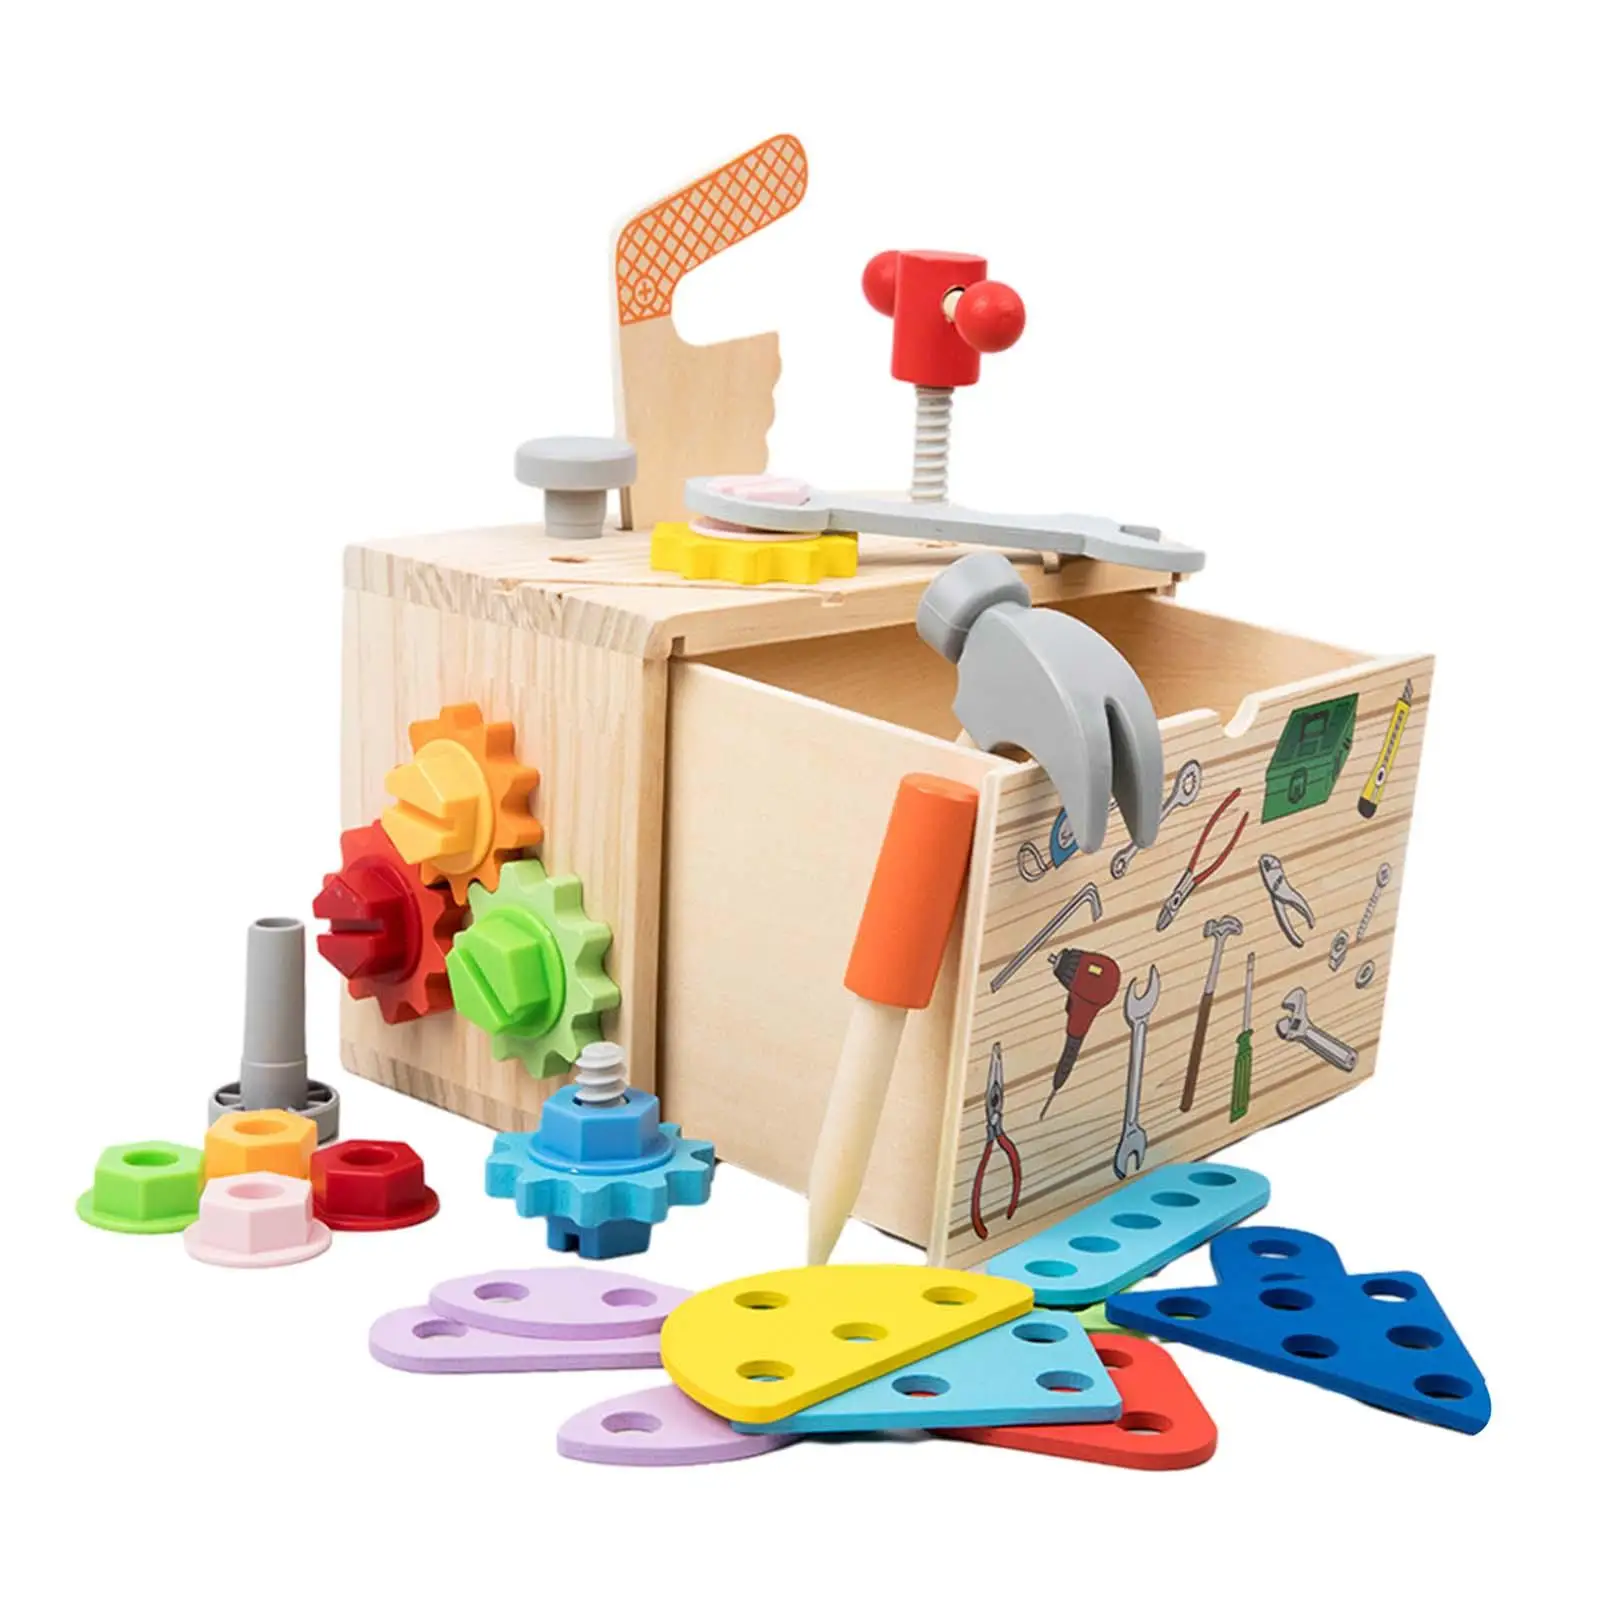 Wooden Toolbox Toy Playset Durable Children Repair Play Tool Set for Christmas 2 3 4 5 Years Old New Year Girls Boys Toddlers